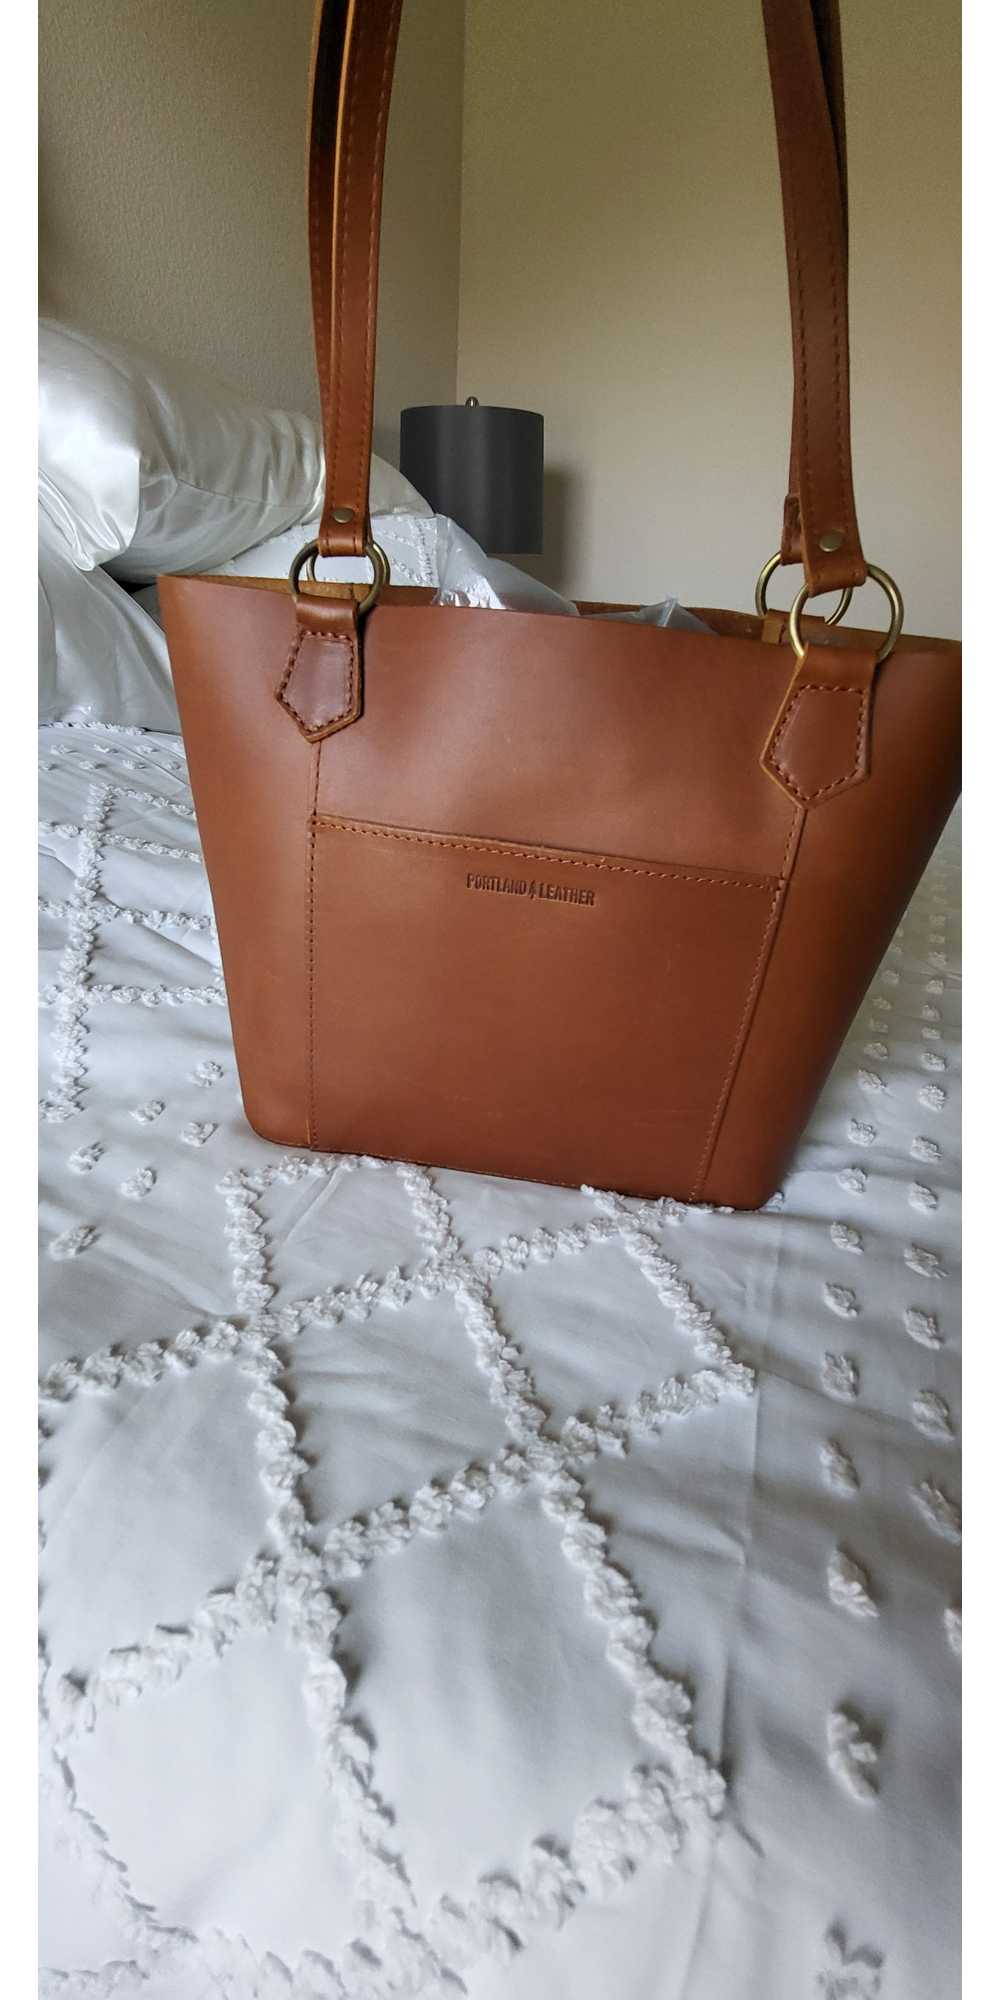 Portland Leather 'Almost Perfect' The Market Tote - image 7